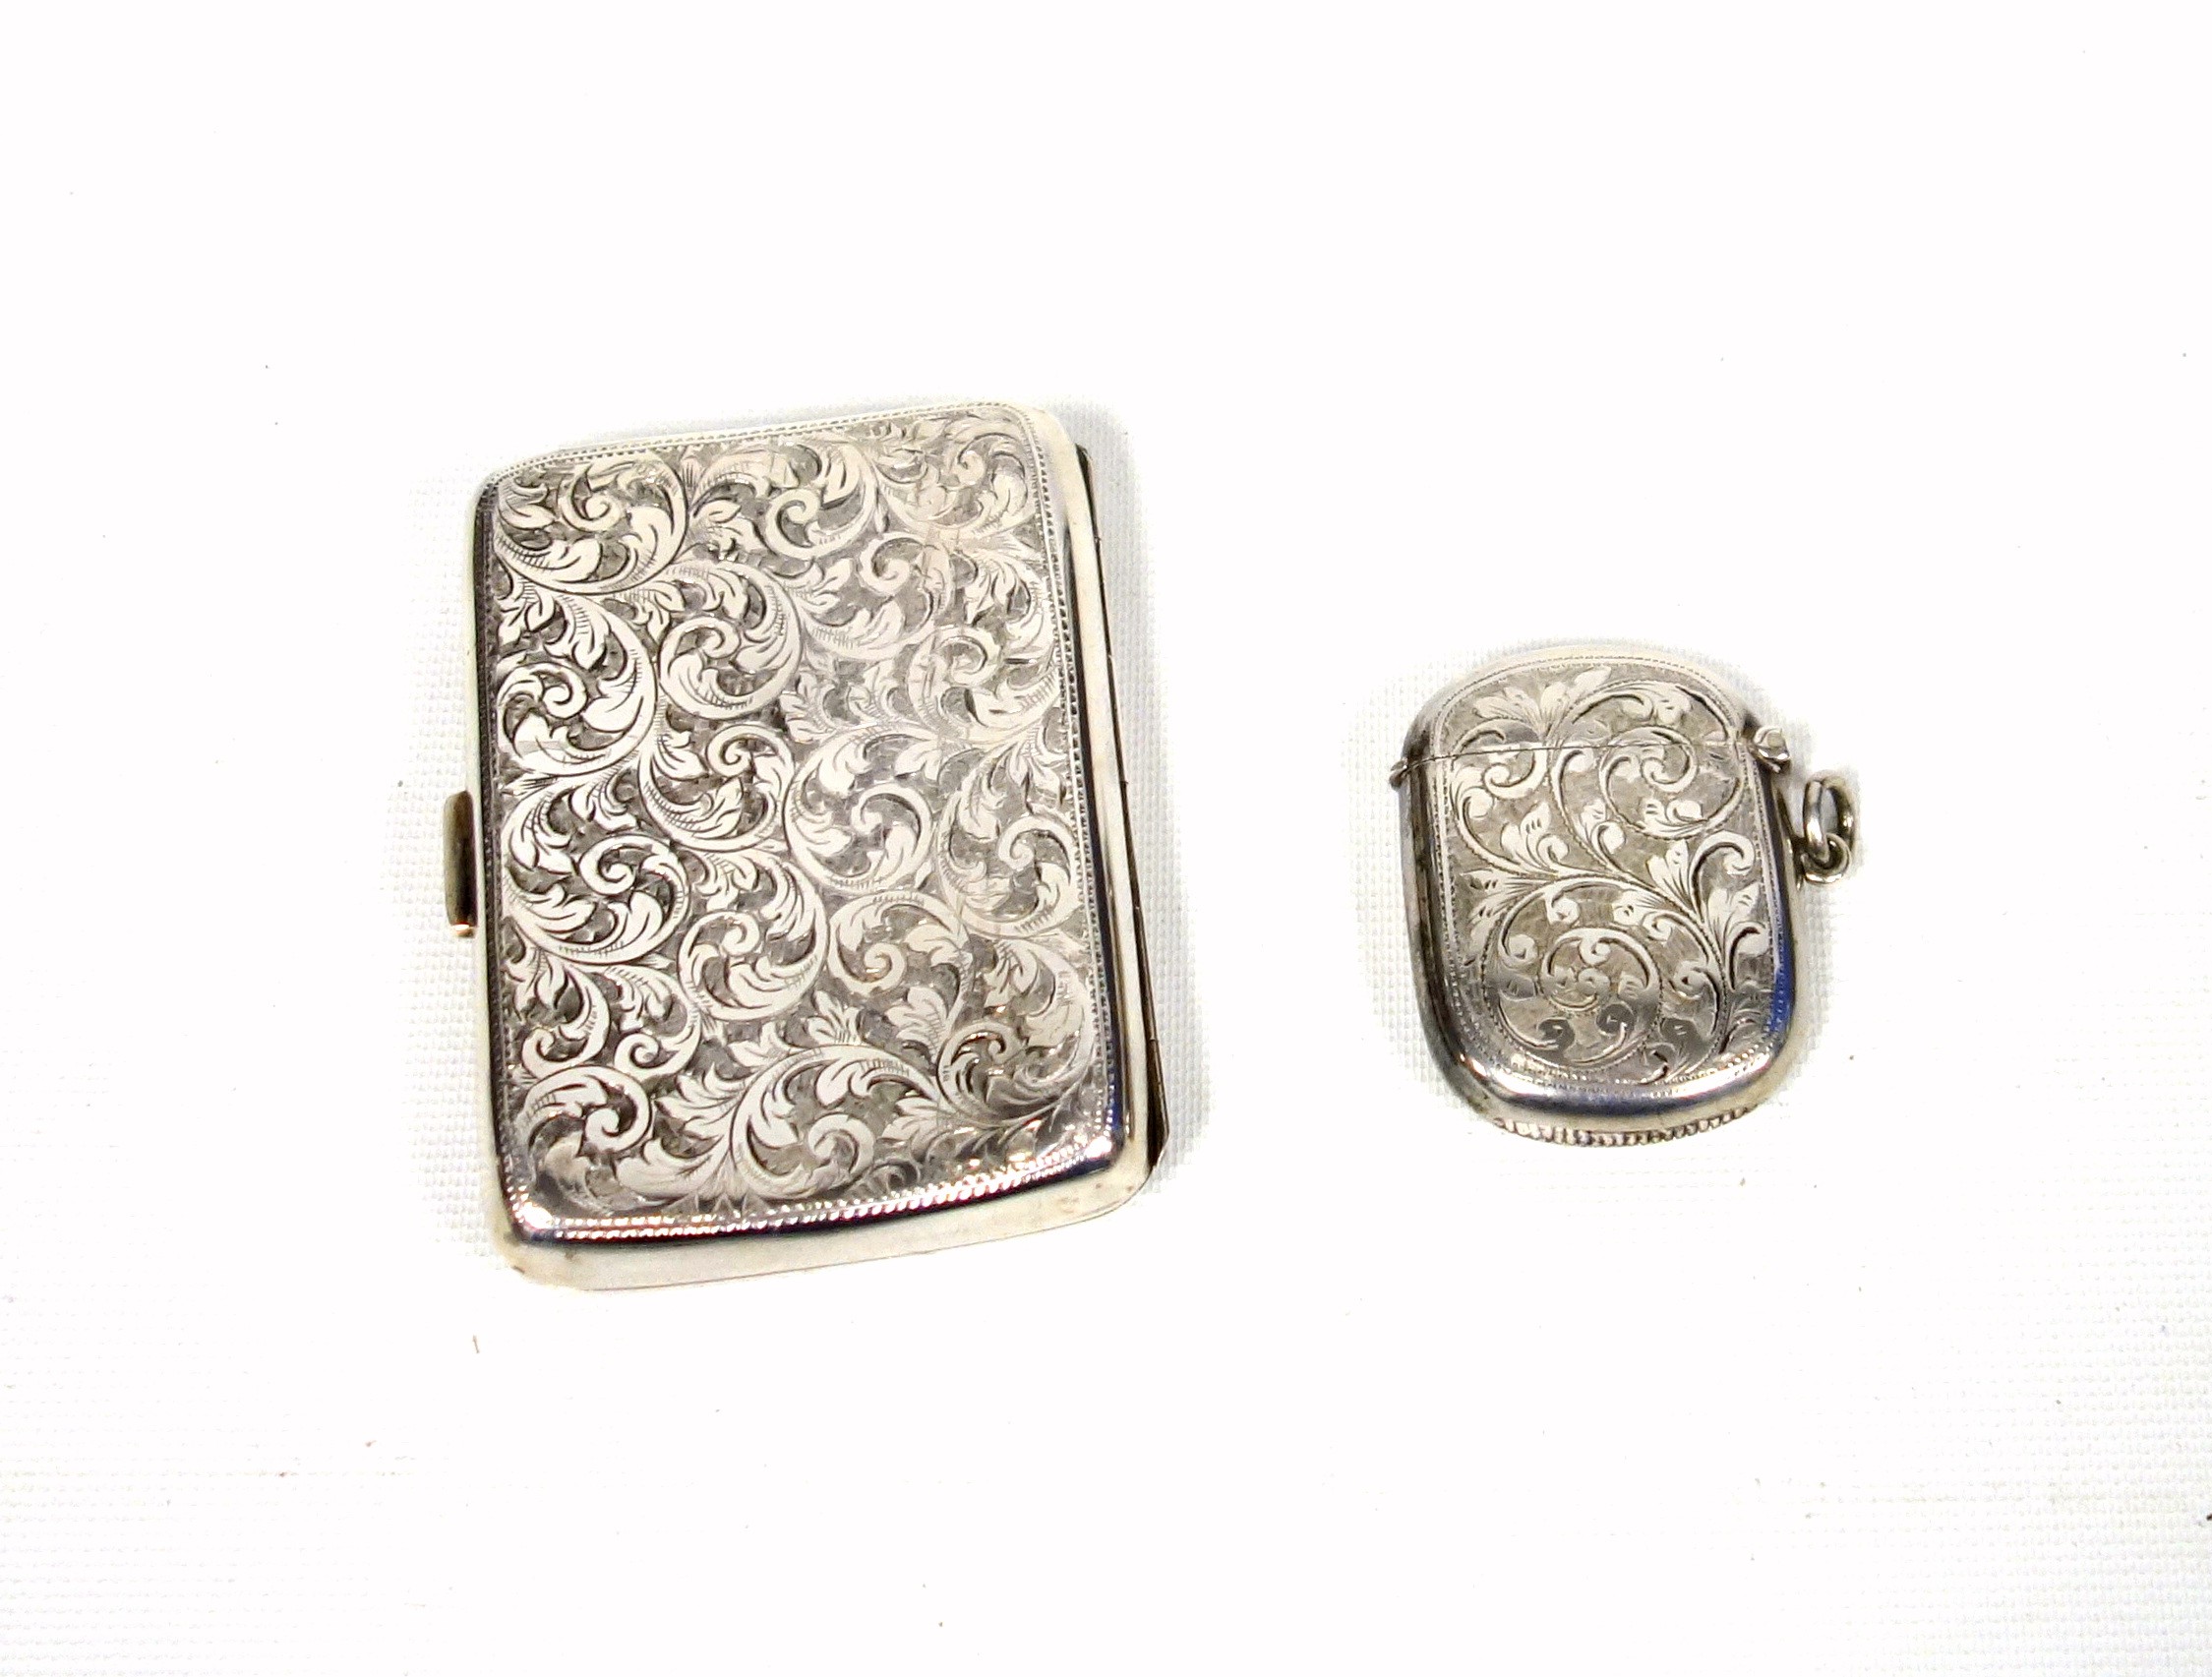 Edwardian lady's silver cigarette case chased all-over with scrolling foliate decoration, the hinged - Image 3 of 6